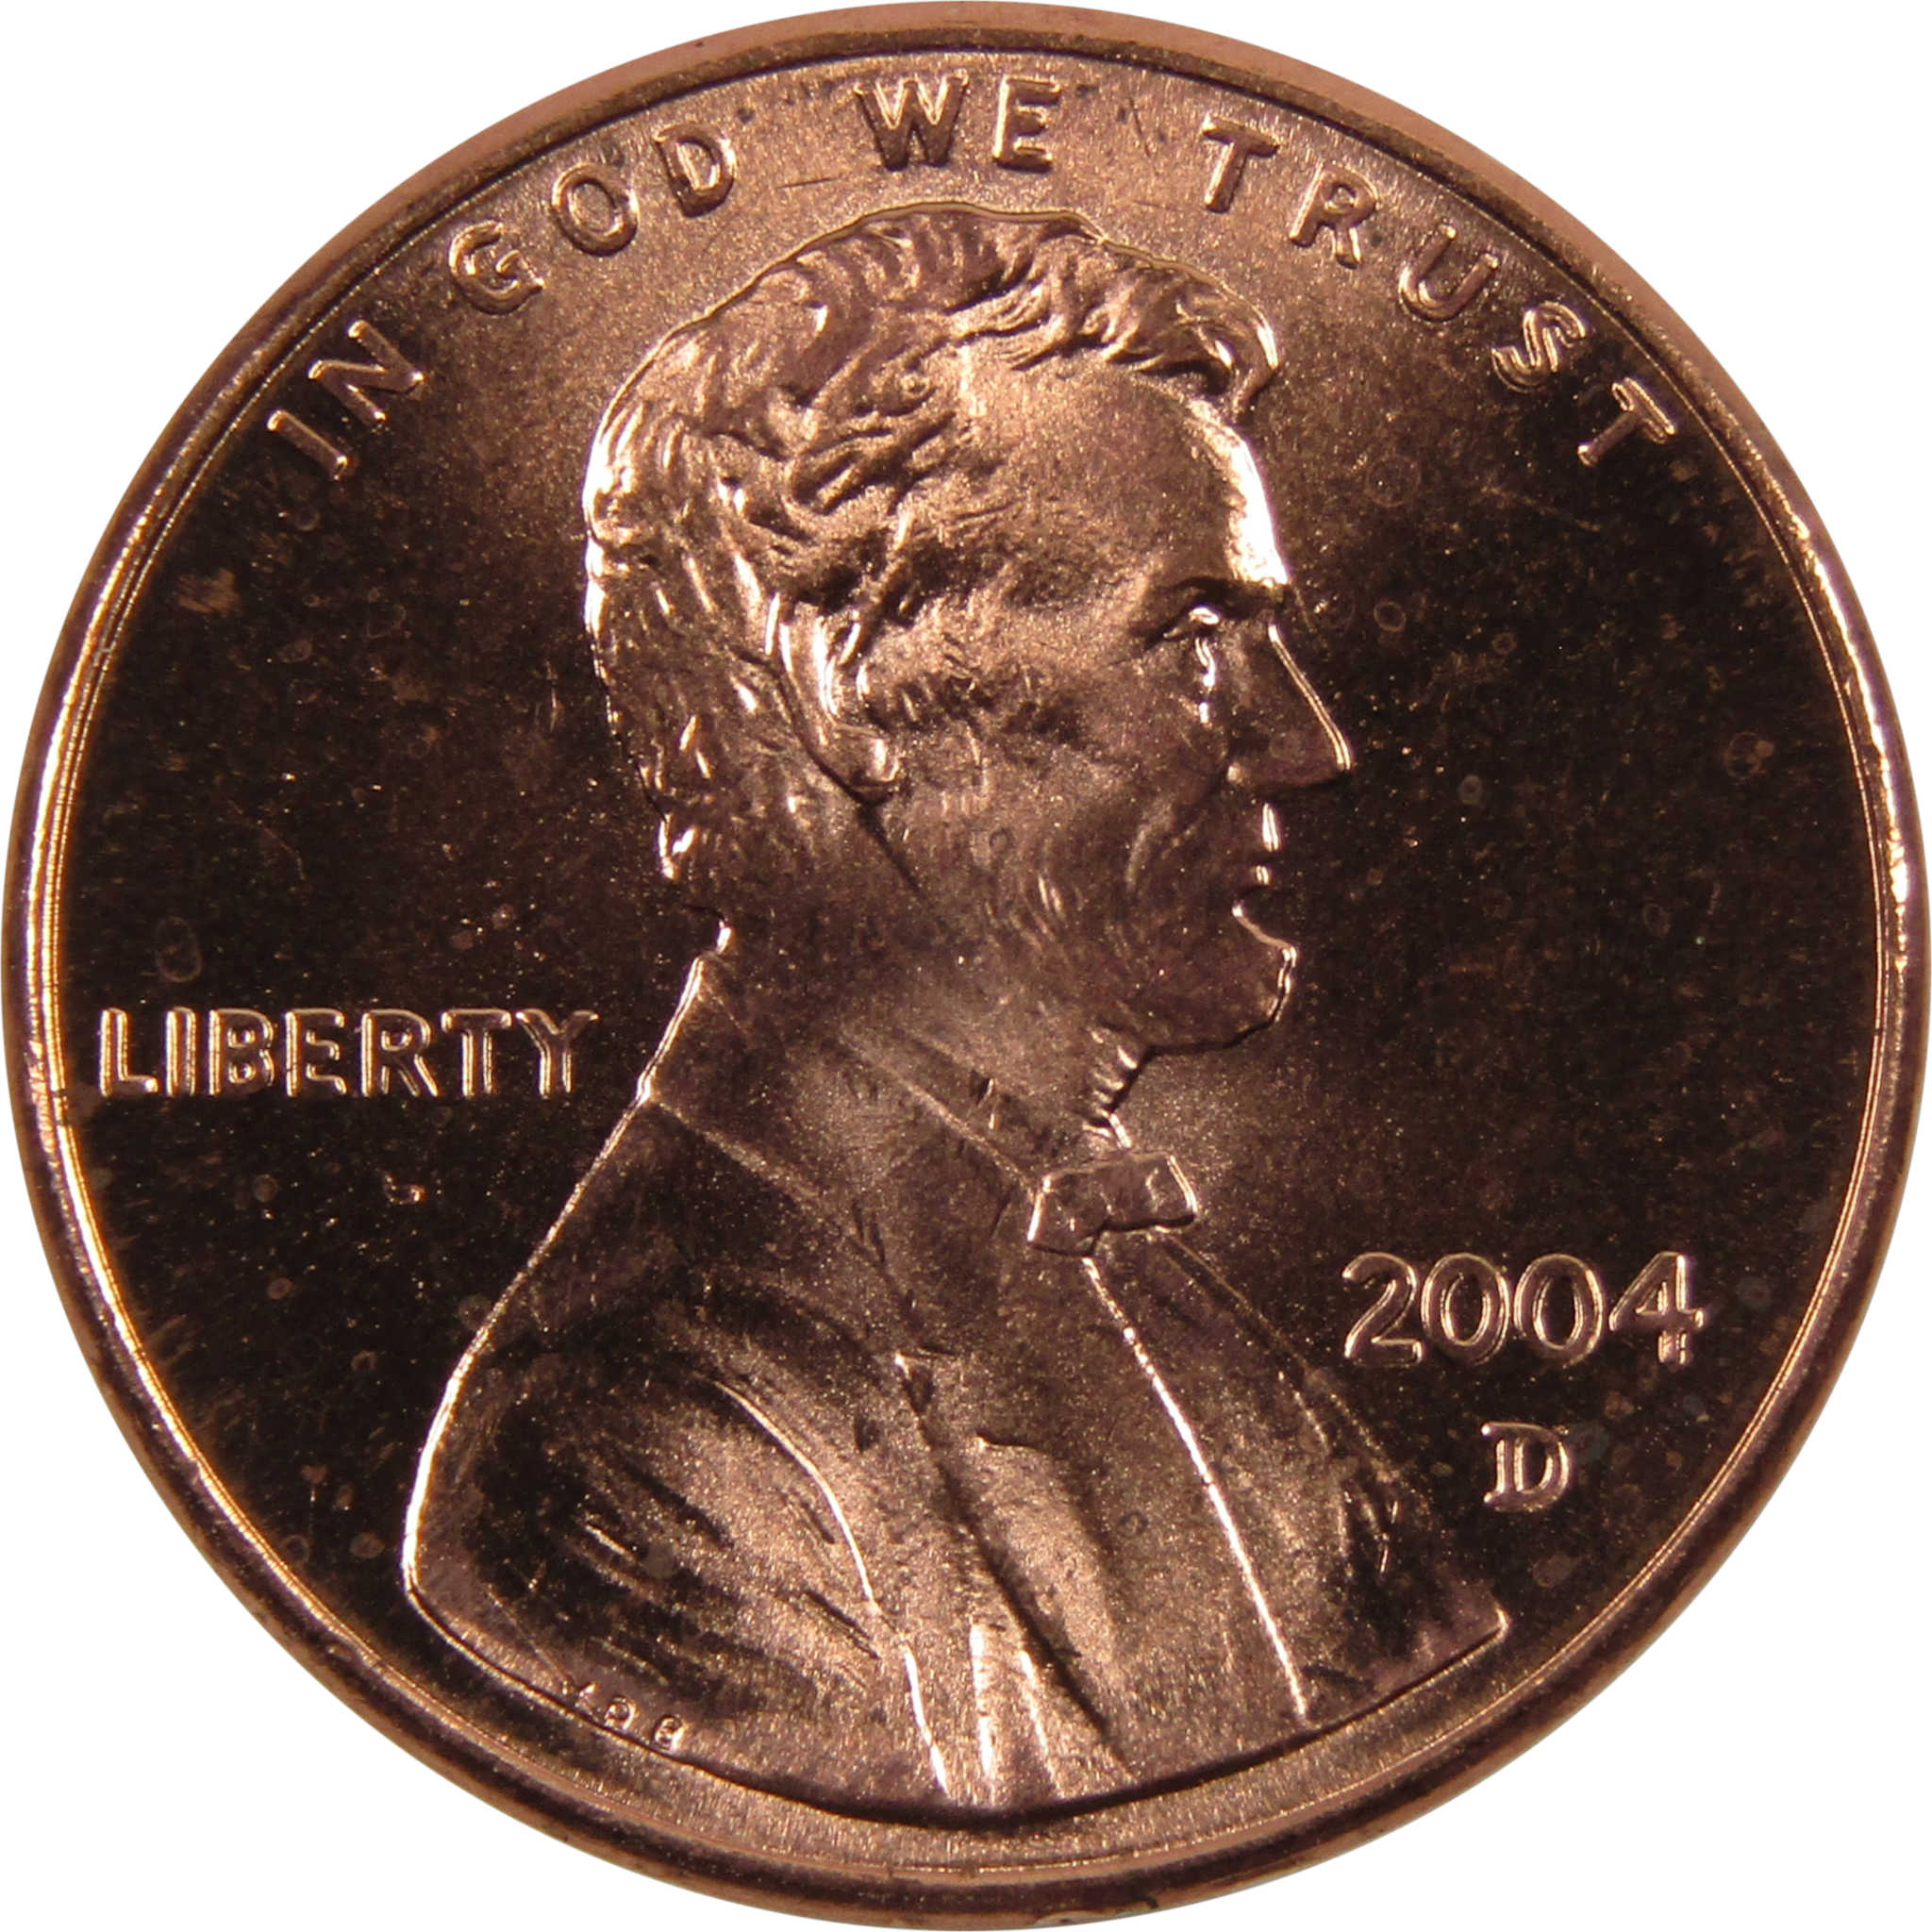 2004 D Lincoln Memorial Cent BU Uncirculated Penny 1c Coin